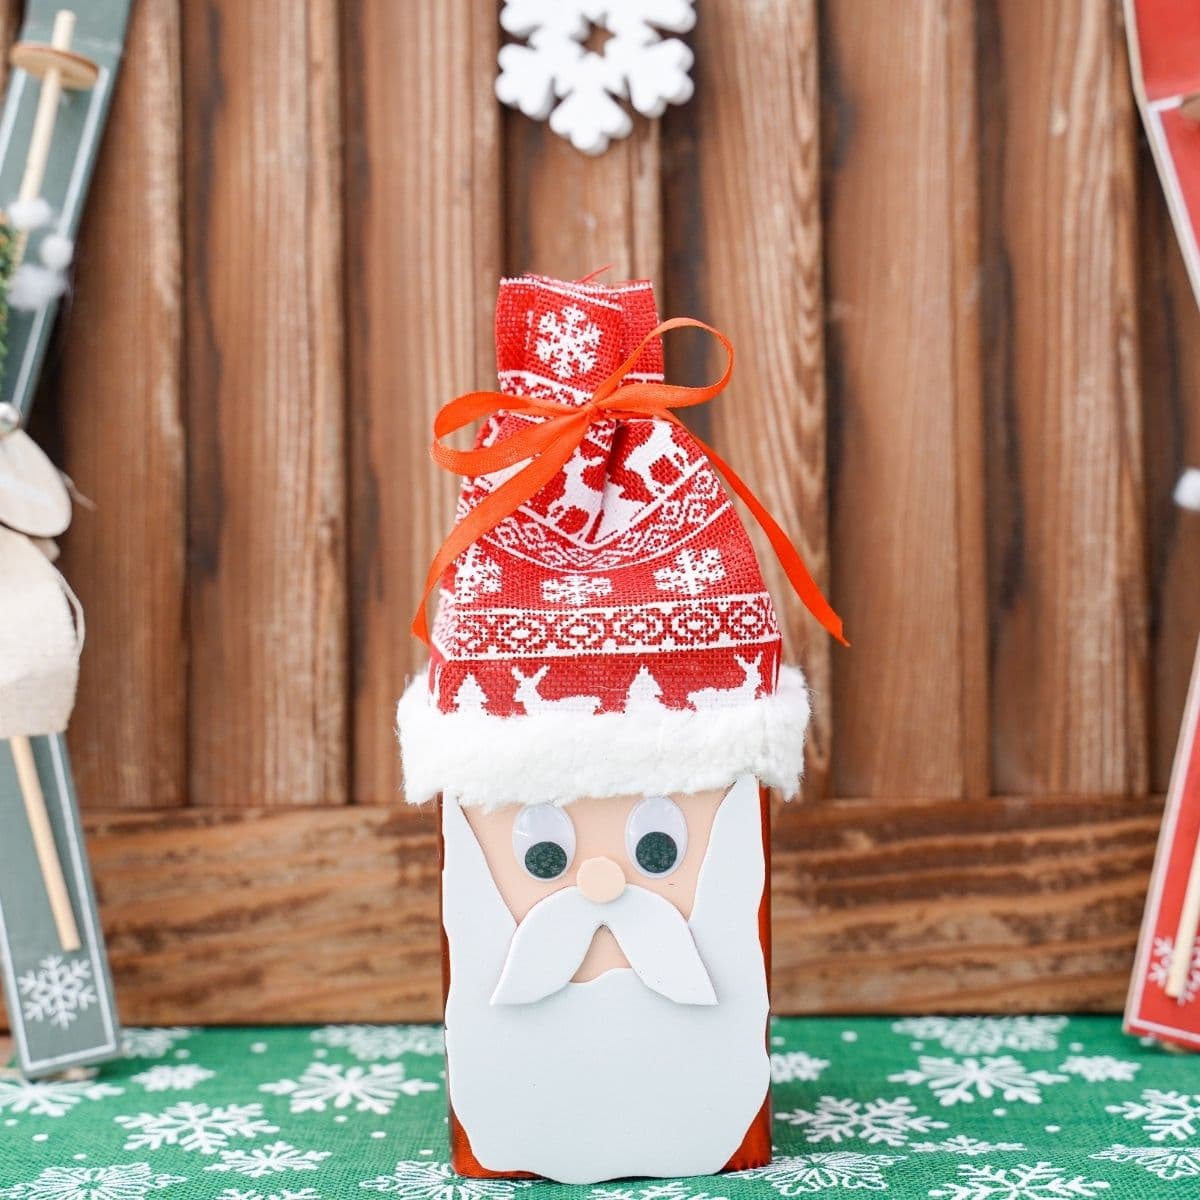 santa claus themed box in front of wood background